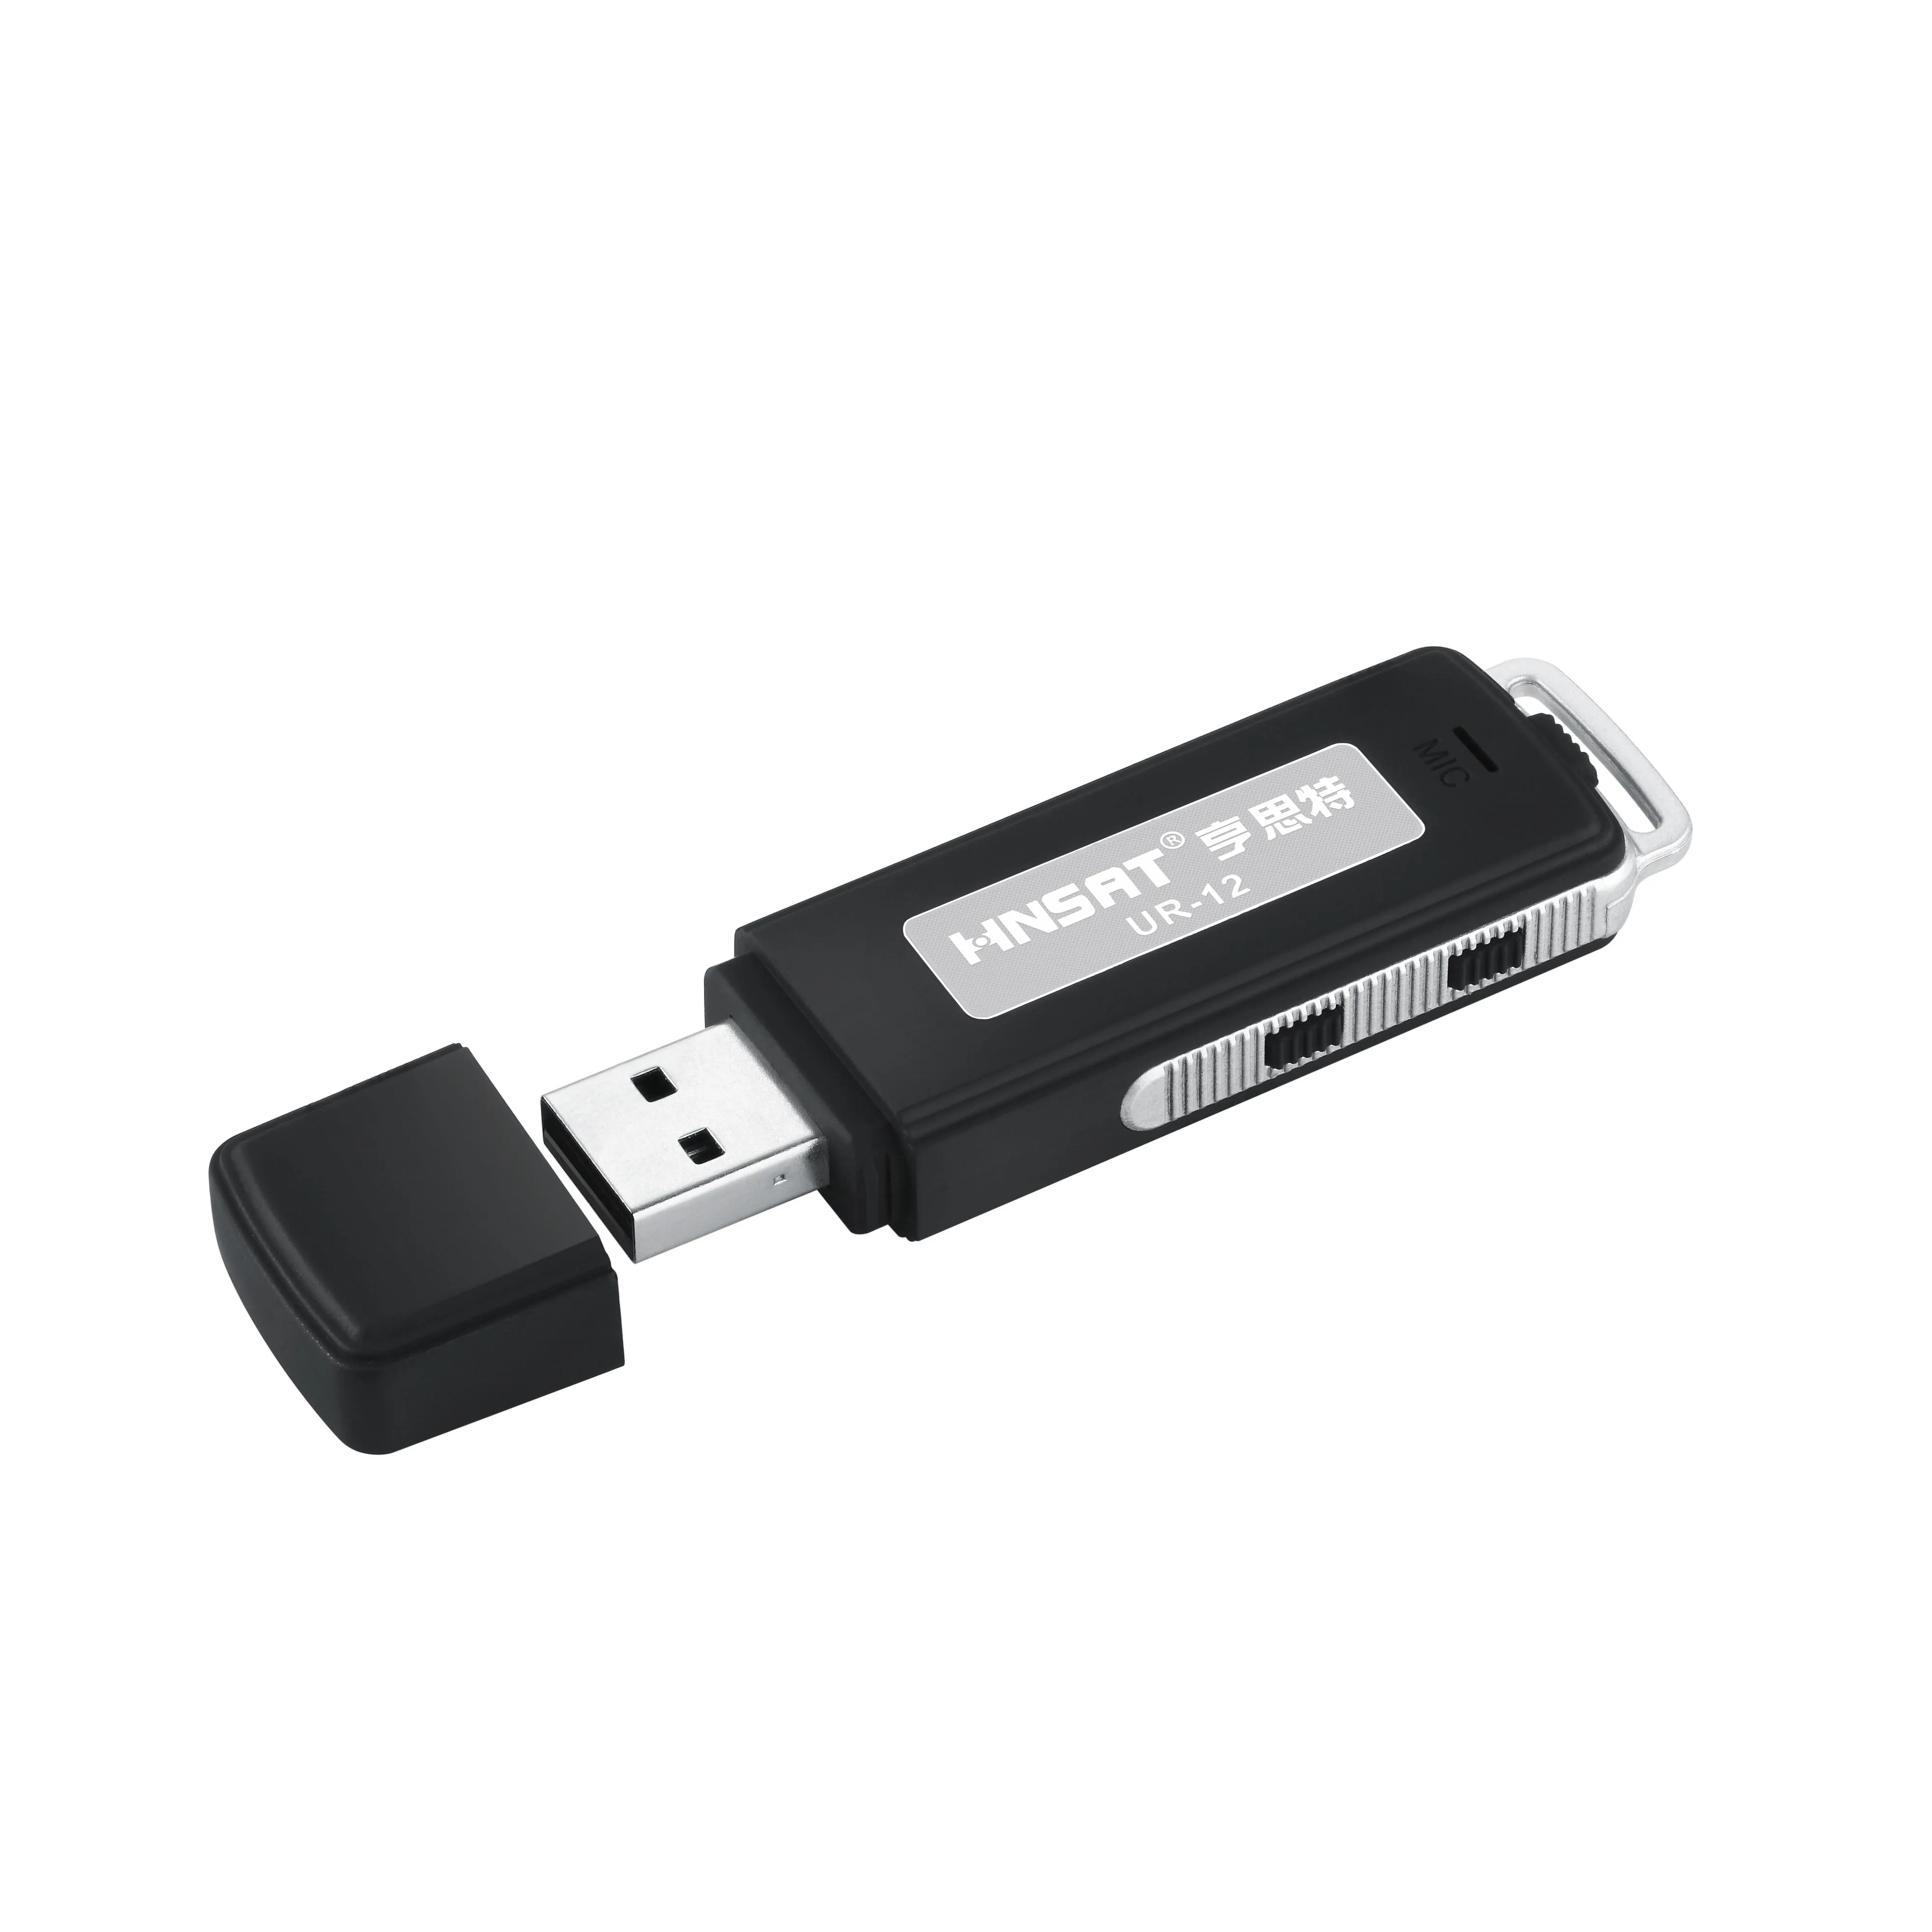 product-Hnsat-4GB Small Recording Device USB Voice Recorder Hidden Spy Recorder-img